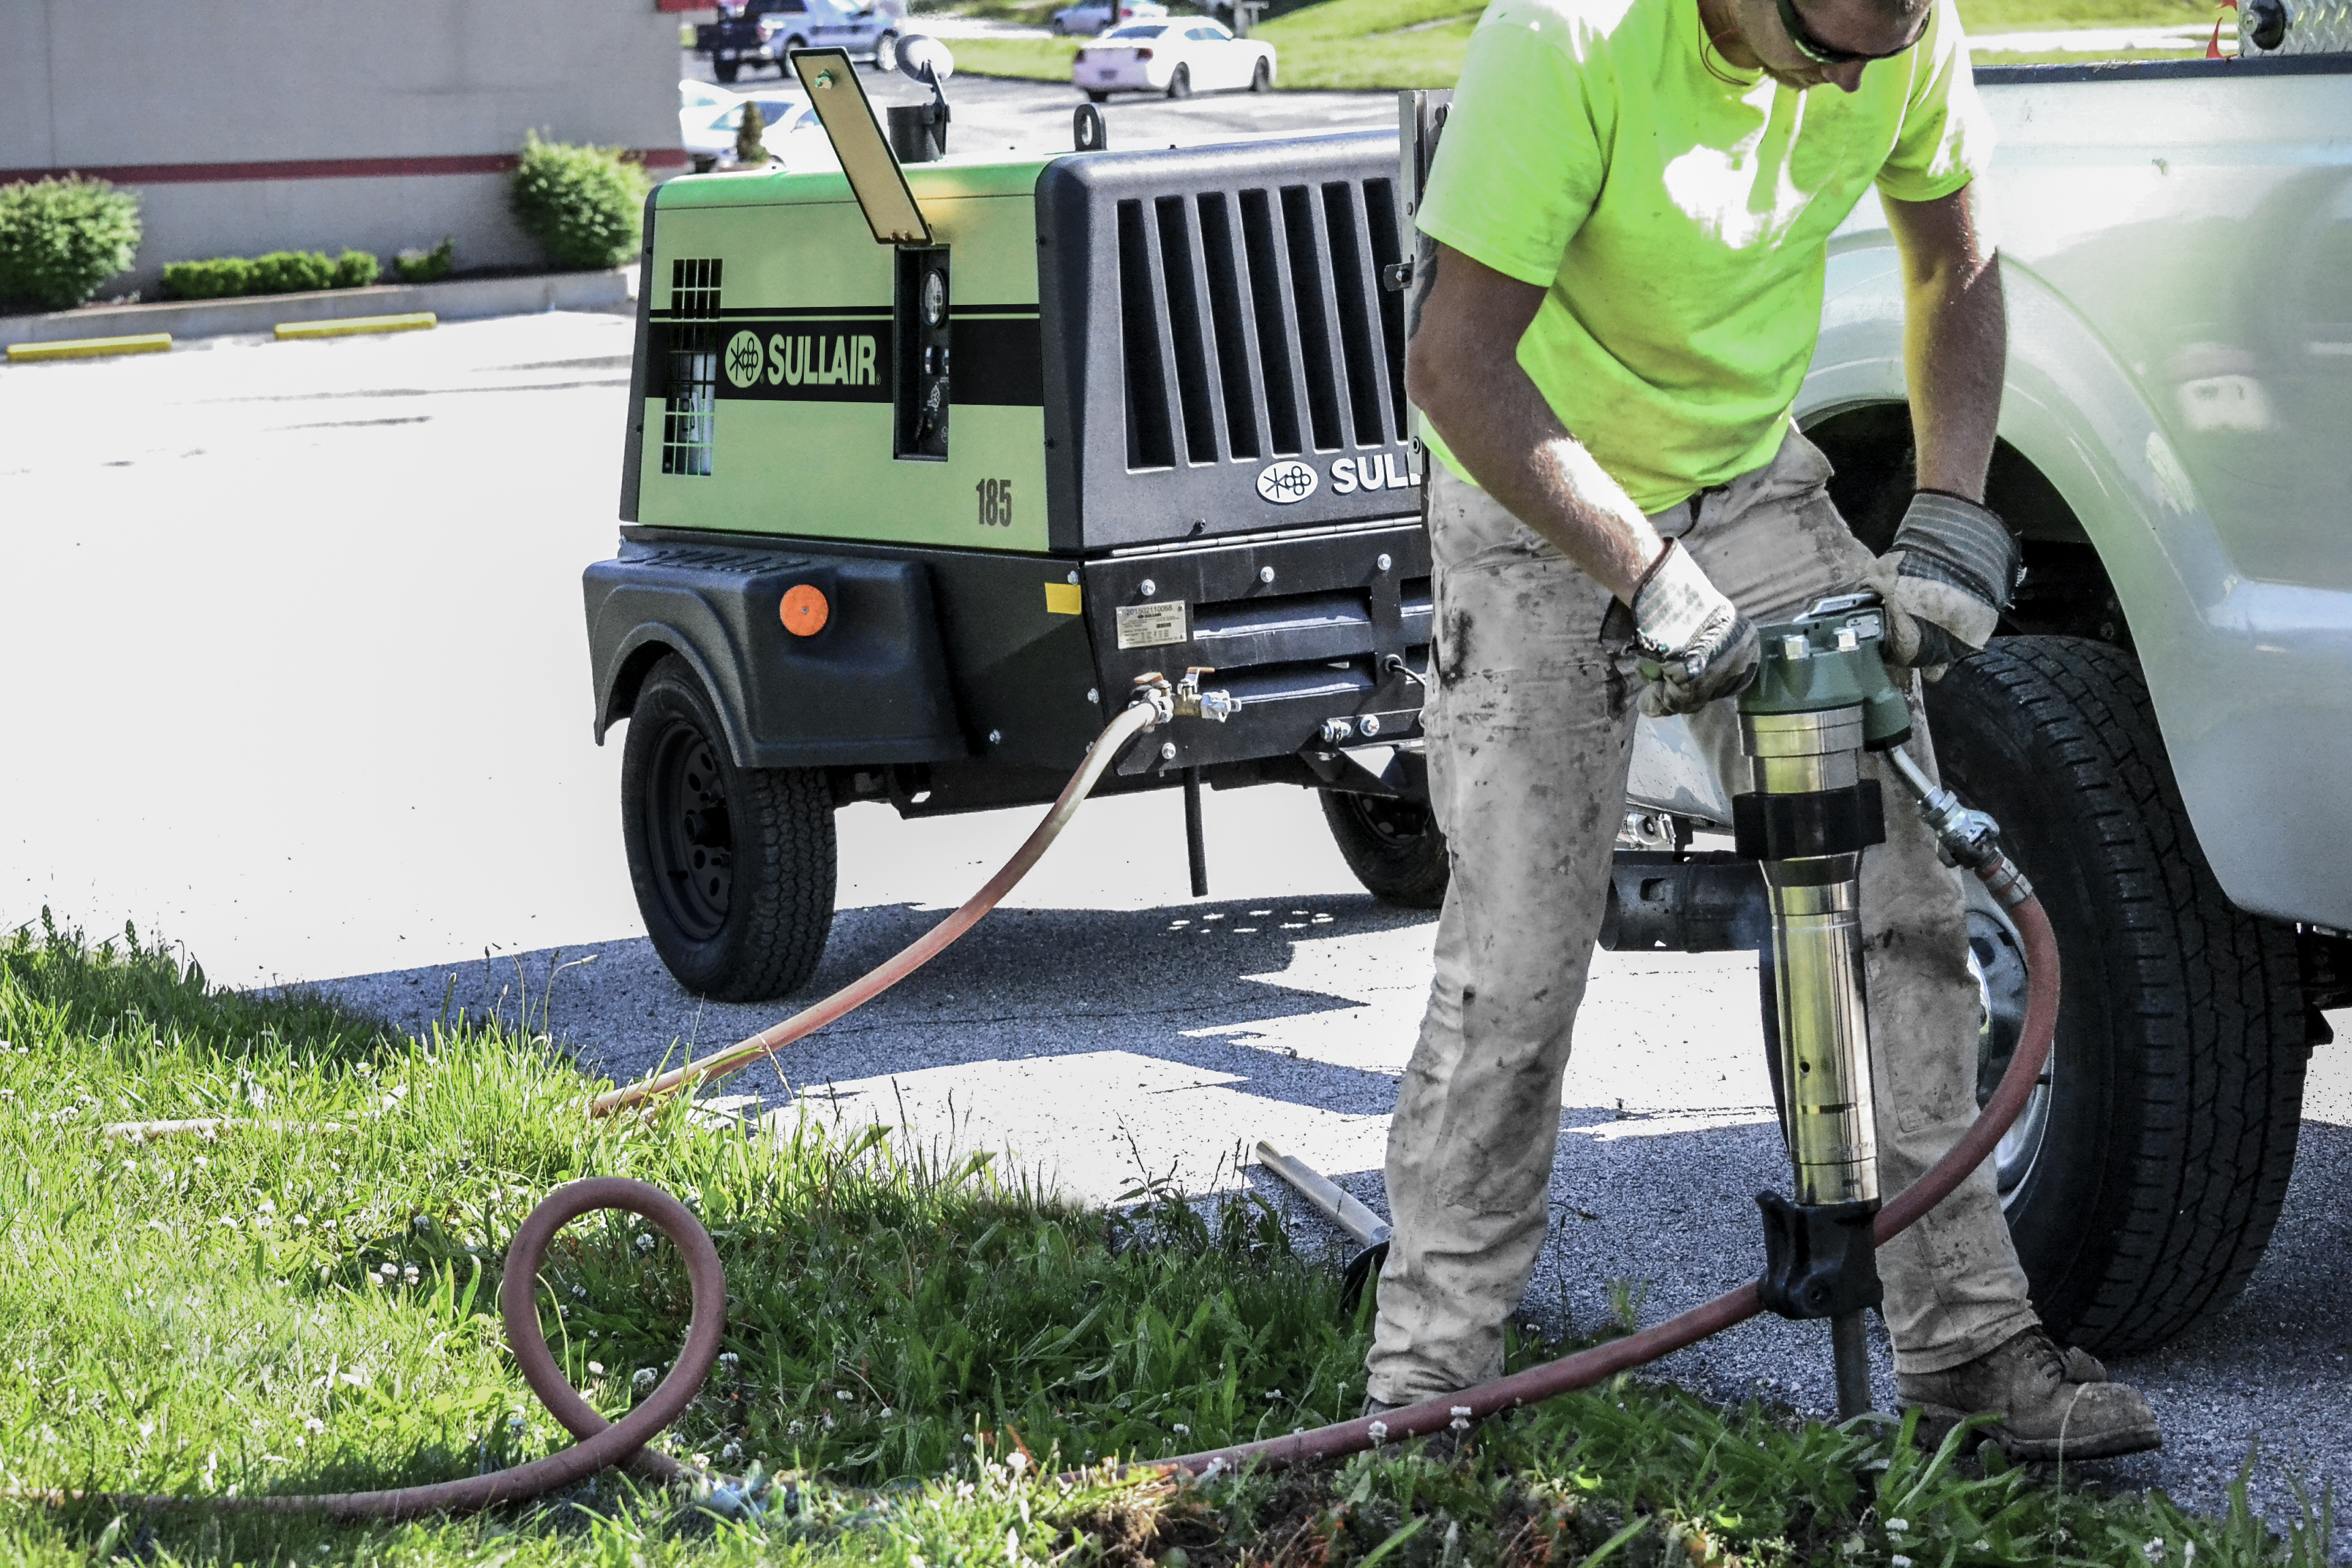 Operator uses a Sullair 185 cfm portable air compressor and Sullair tools